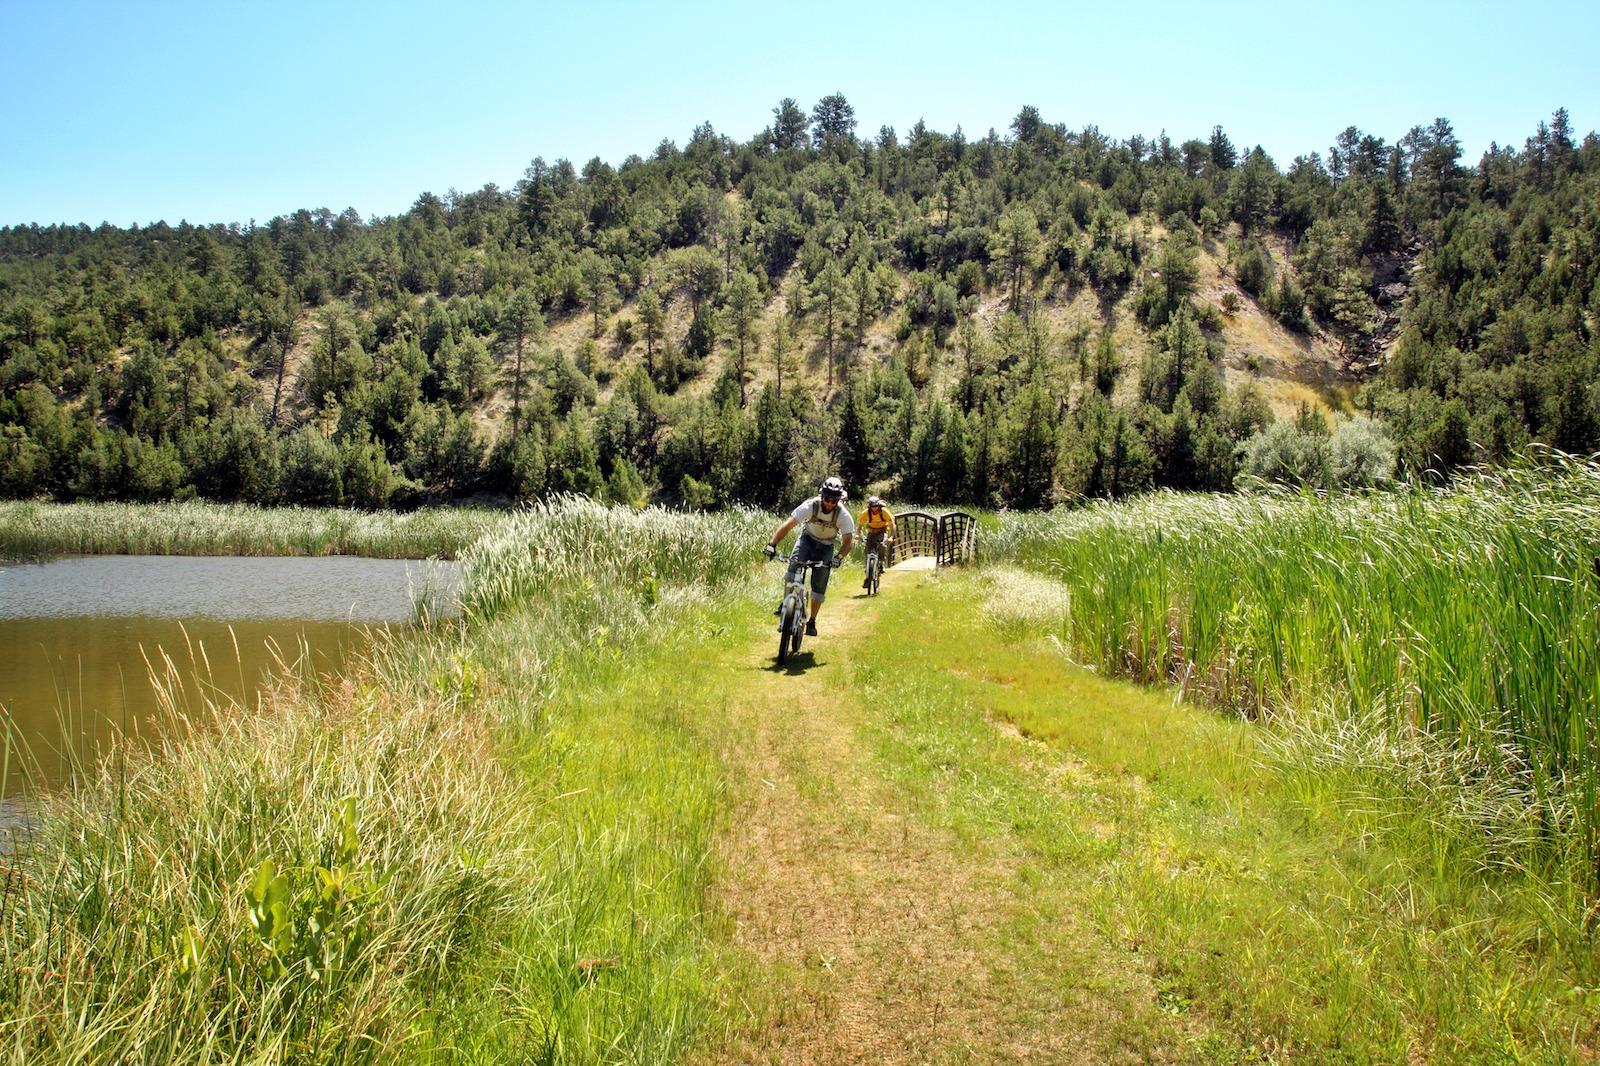 Two mountain bikers on family vacation on an easy trail along Glendo State Park in Platte County, Wyoming